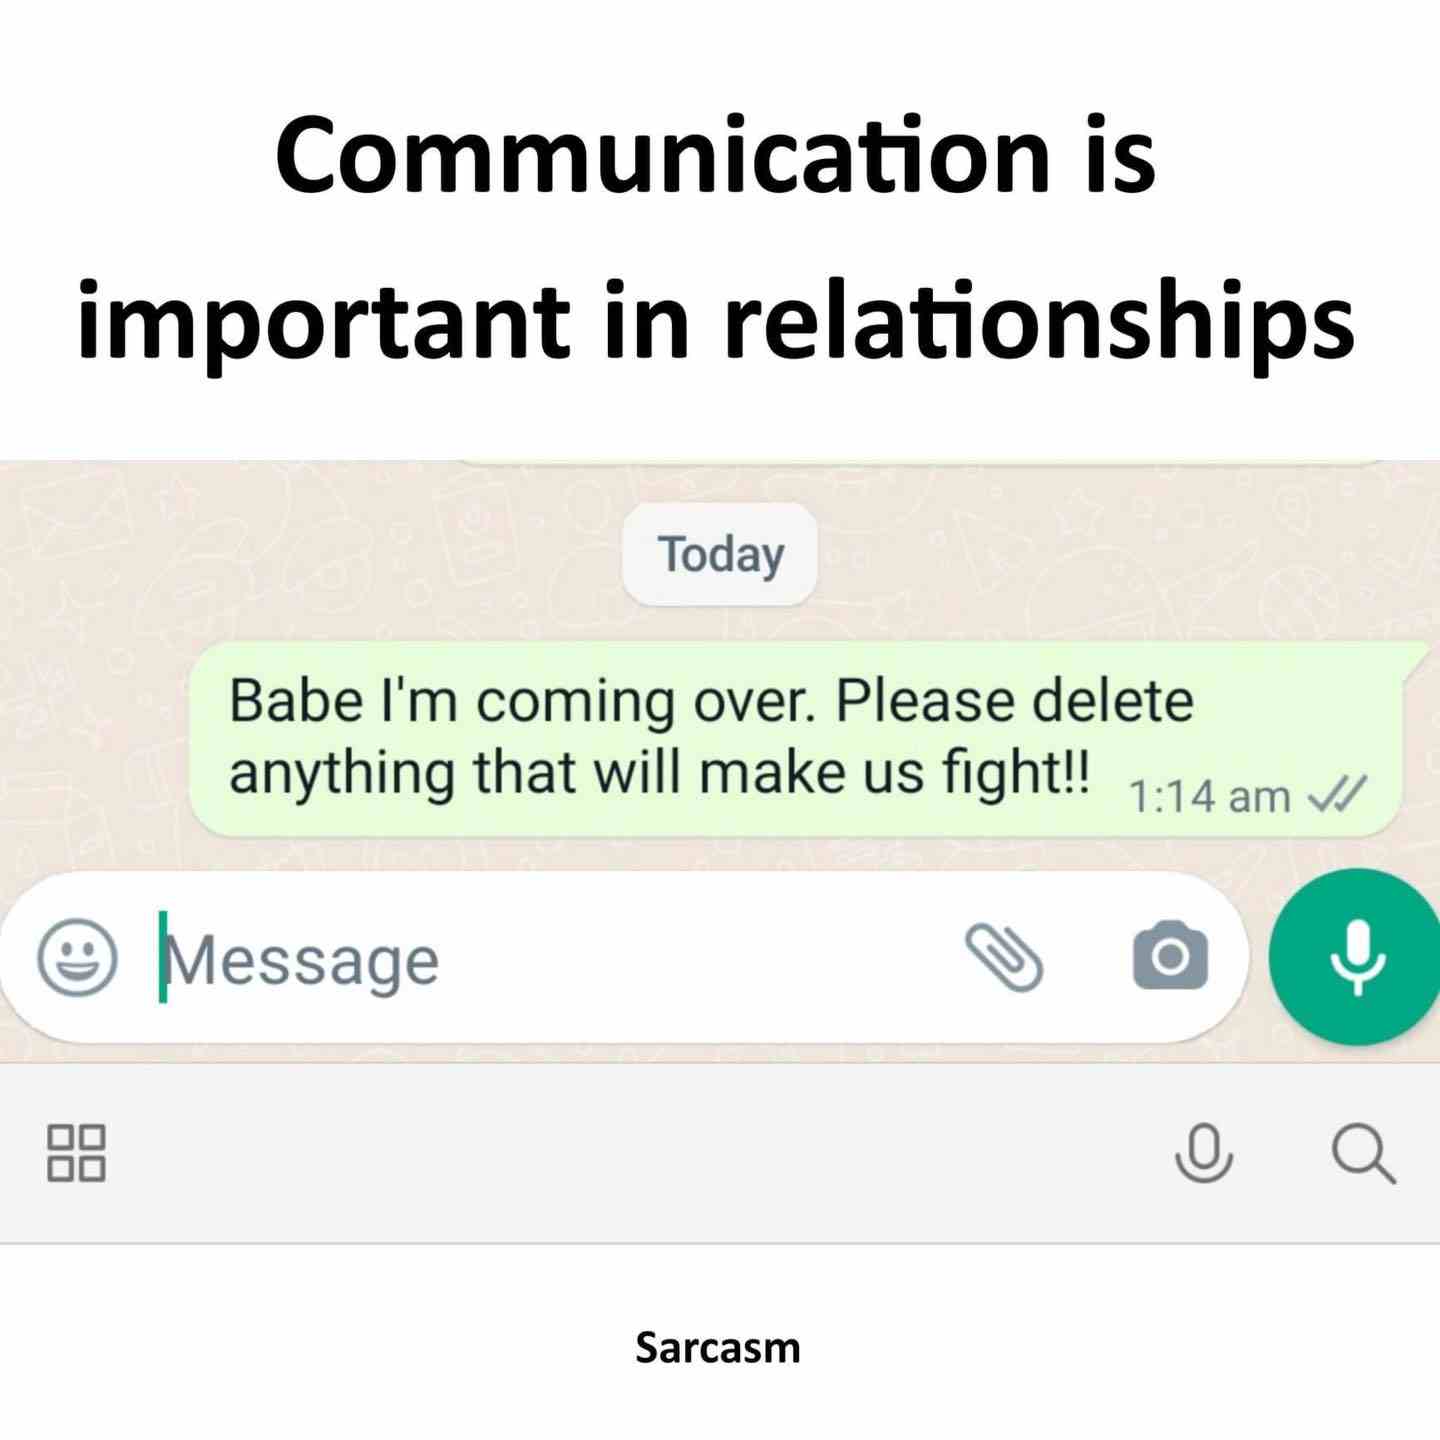 Communication is important in relationships